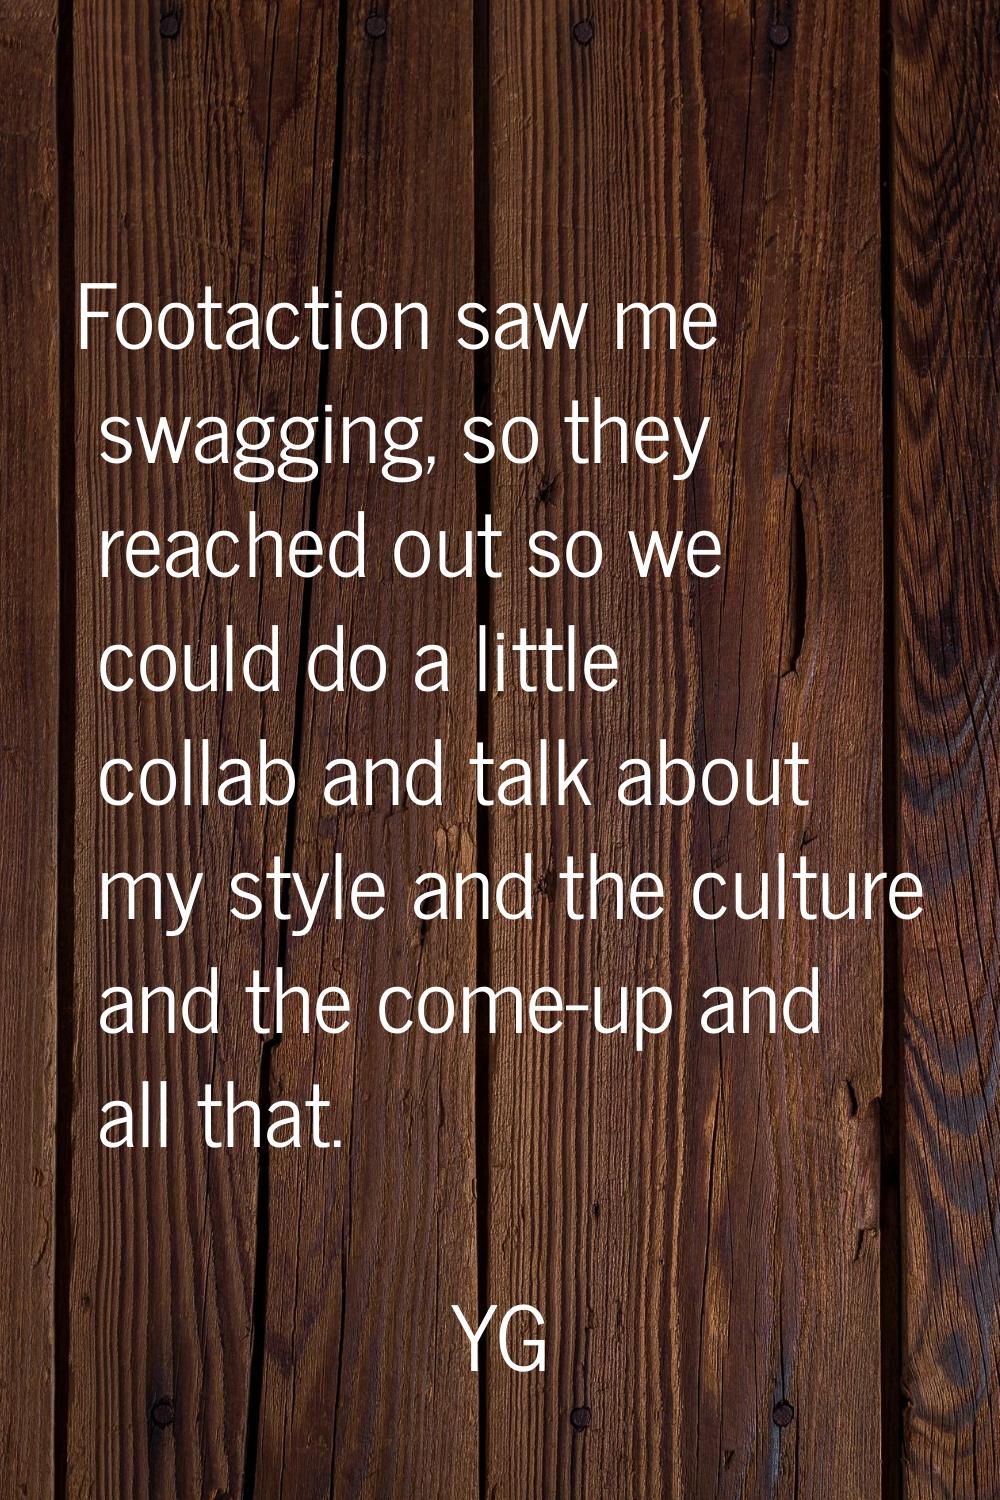 Footaction saw me swagging, so they reached out so we could do a little collab and talk about my st